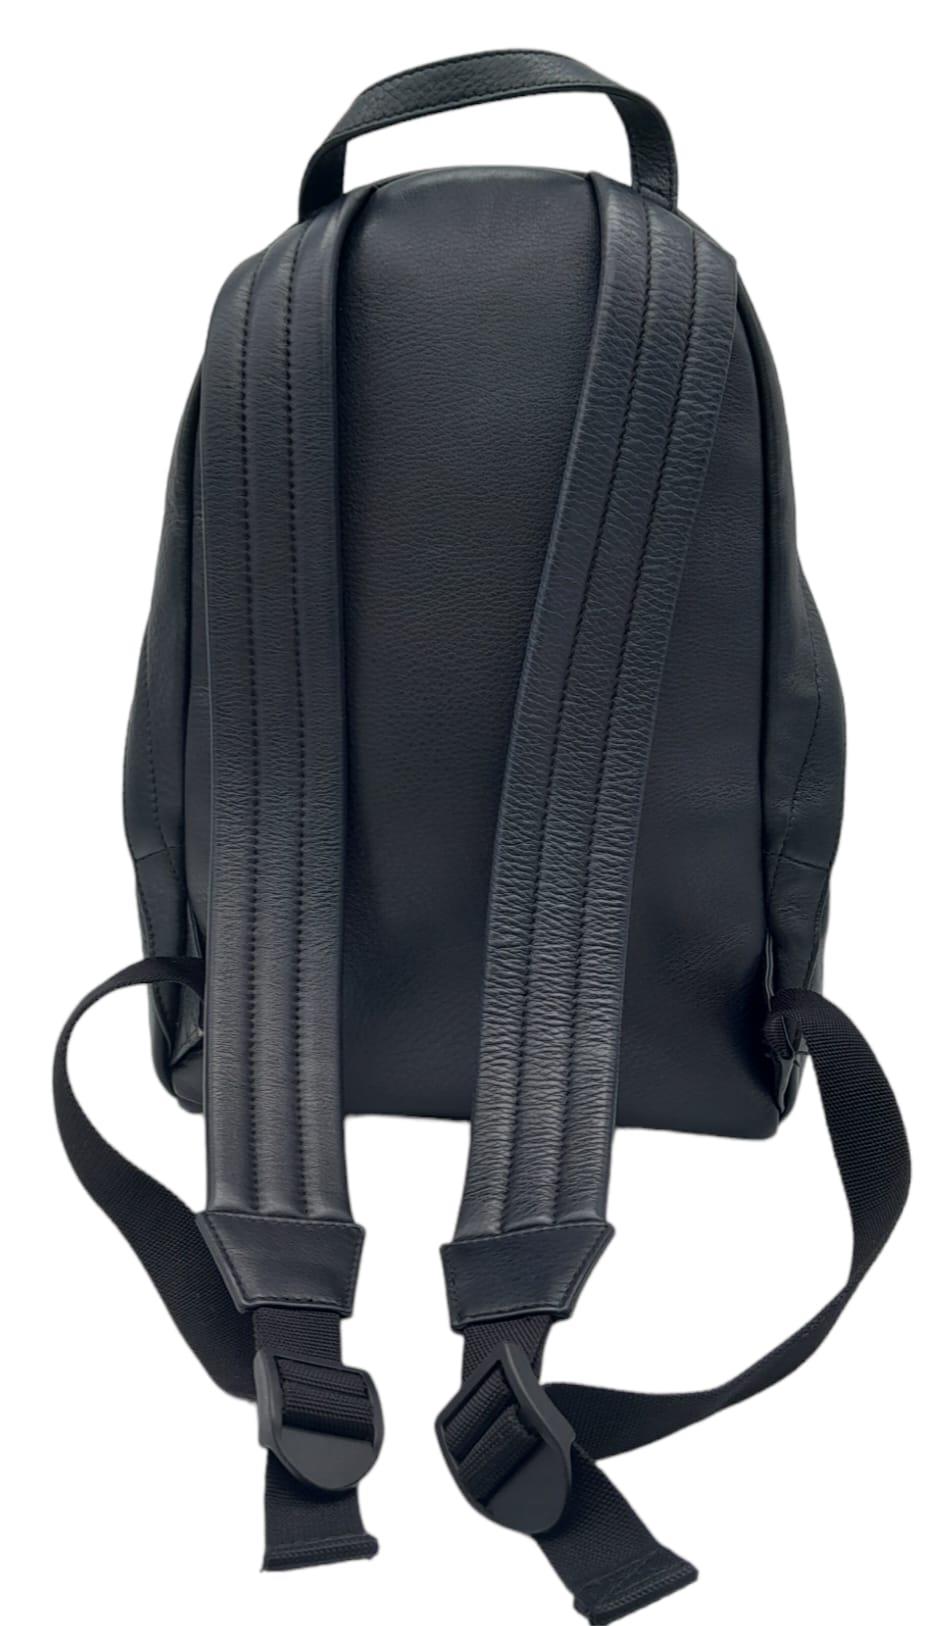 Balenciaga Backpack. Quality leather throughout, adjustable shoulder straps and a handy front zip - Image 3 of 8